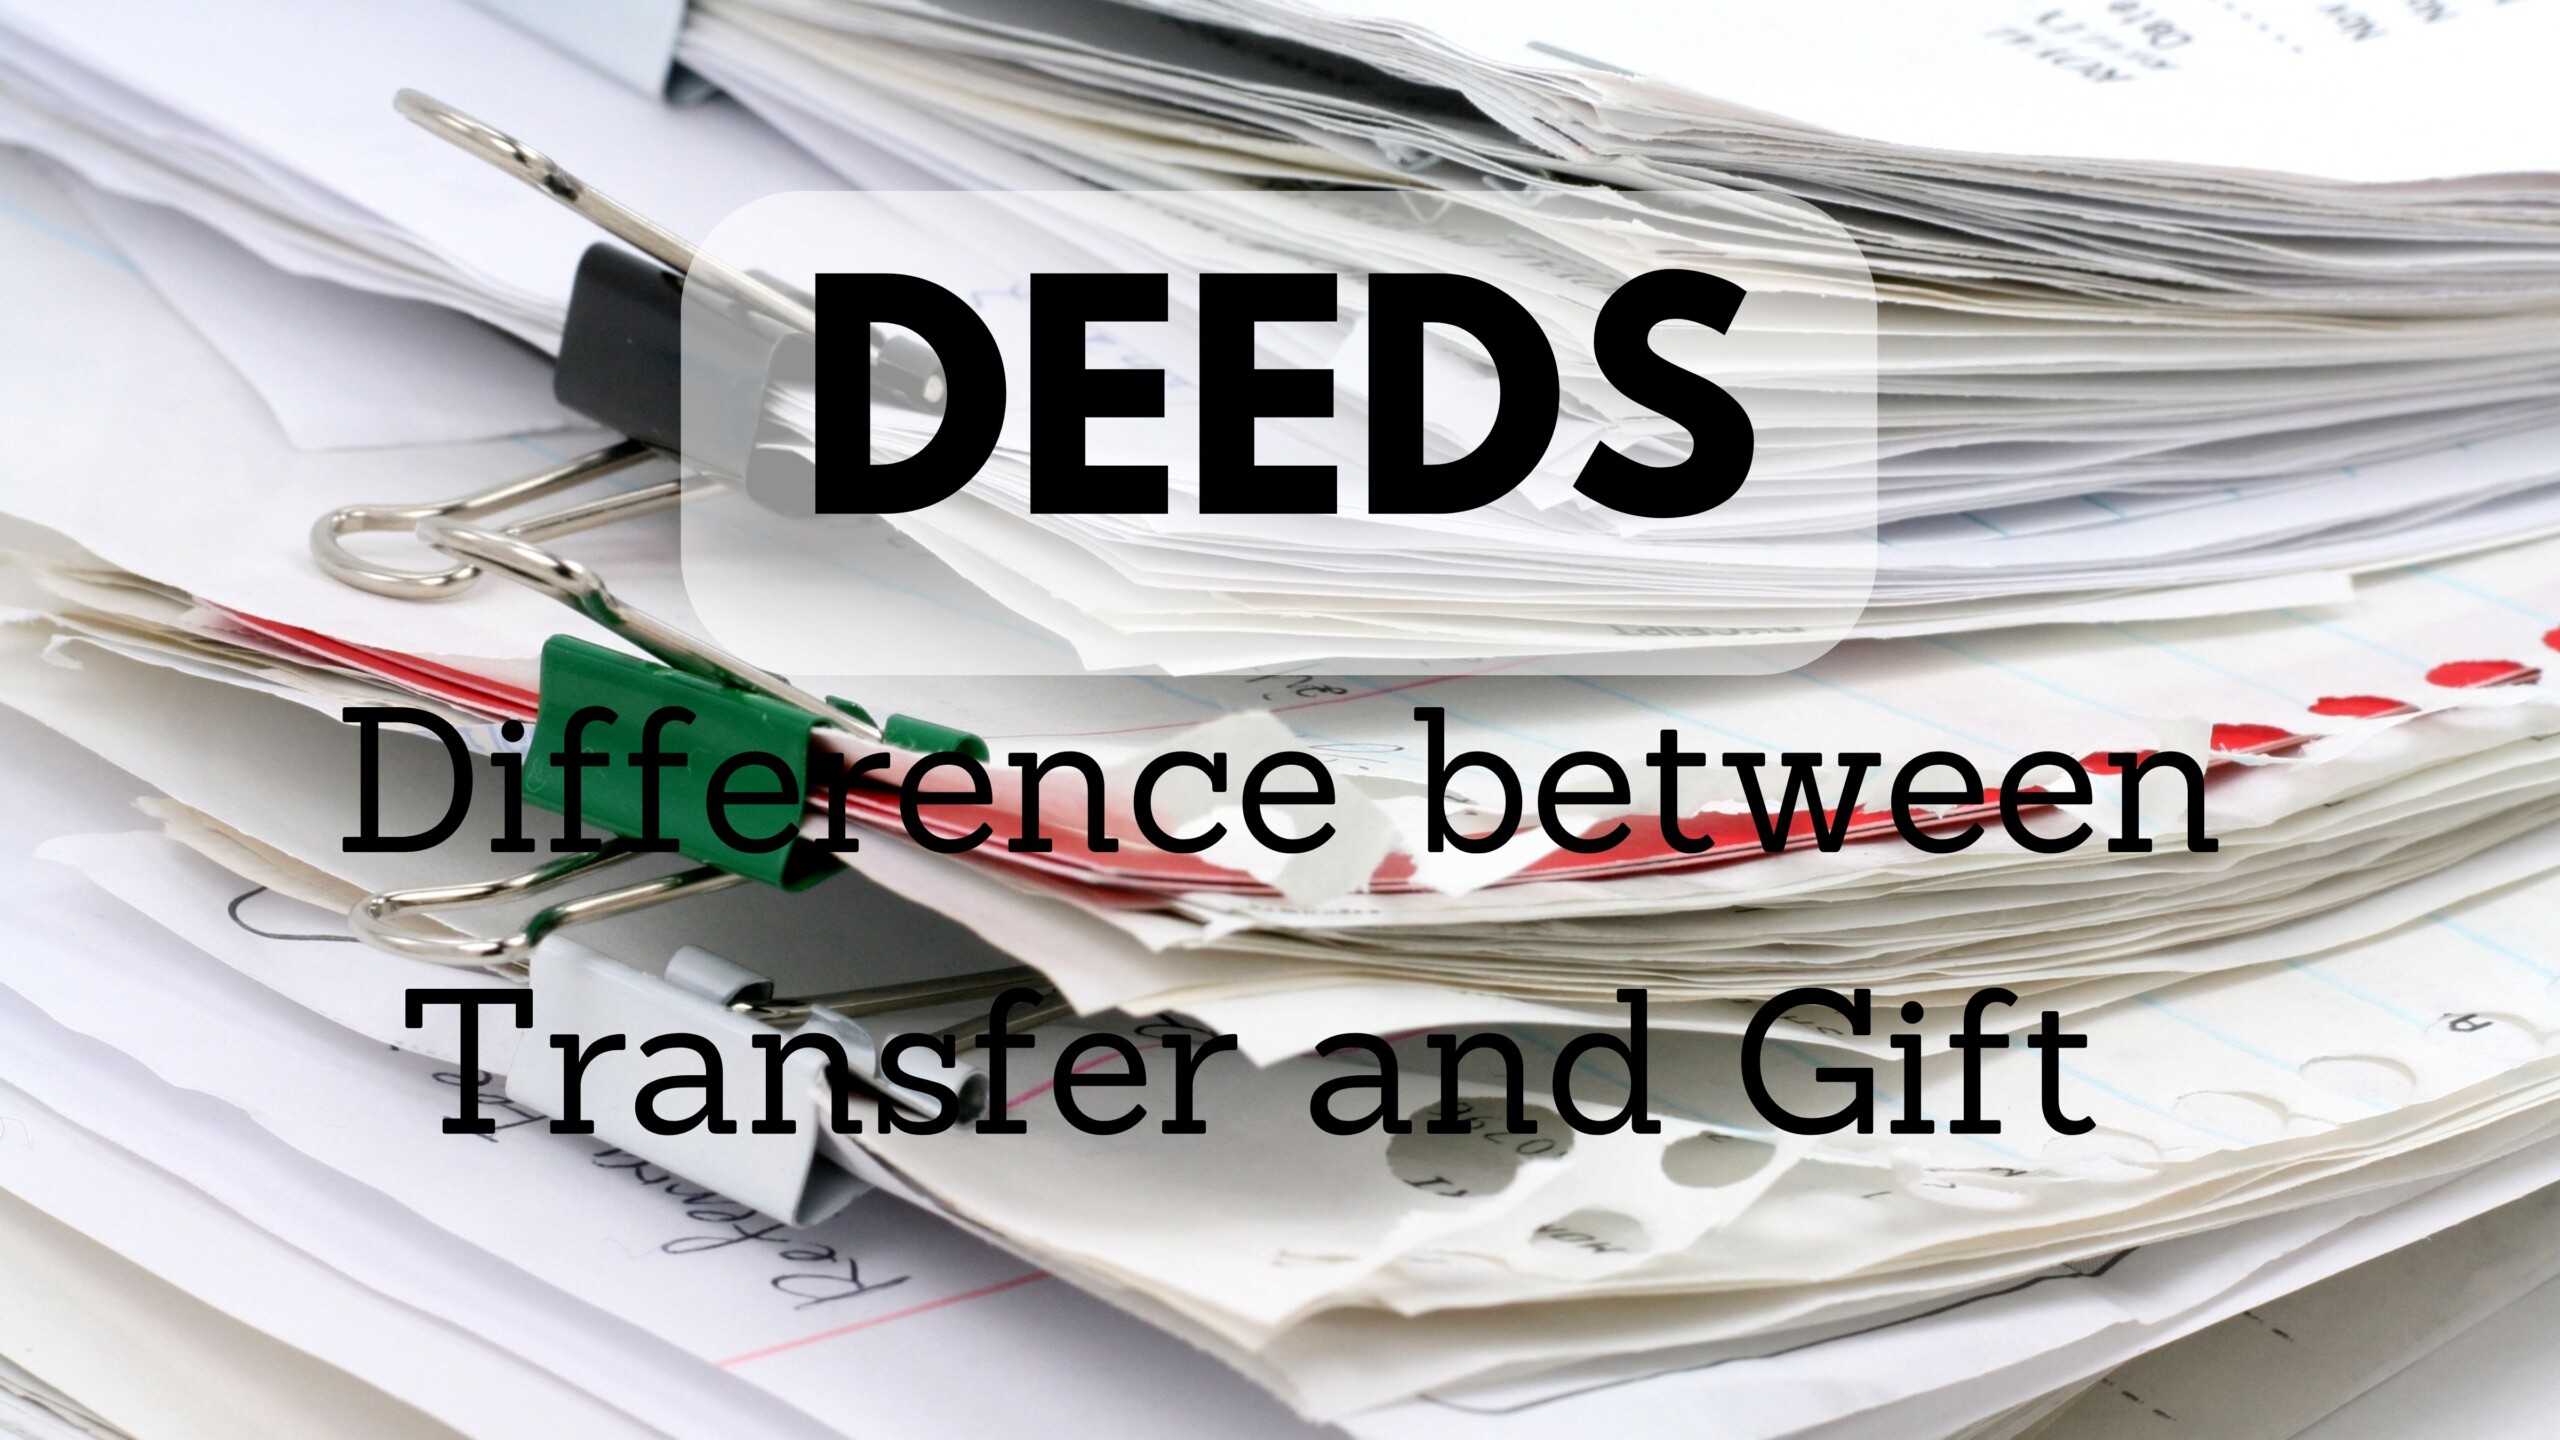 Removing Someone from a Real Estate Deed - Deeds.com